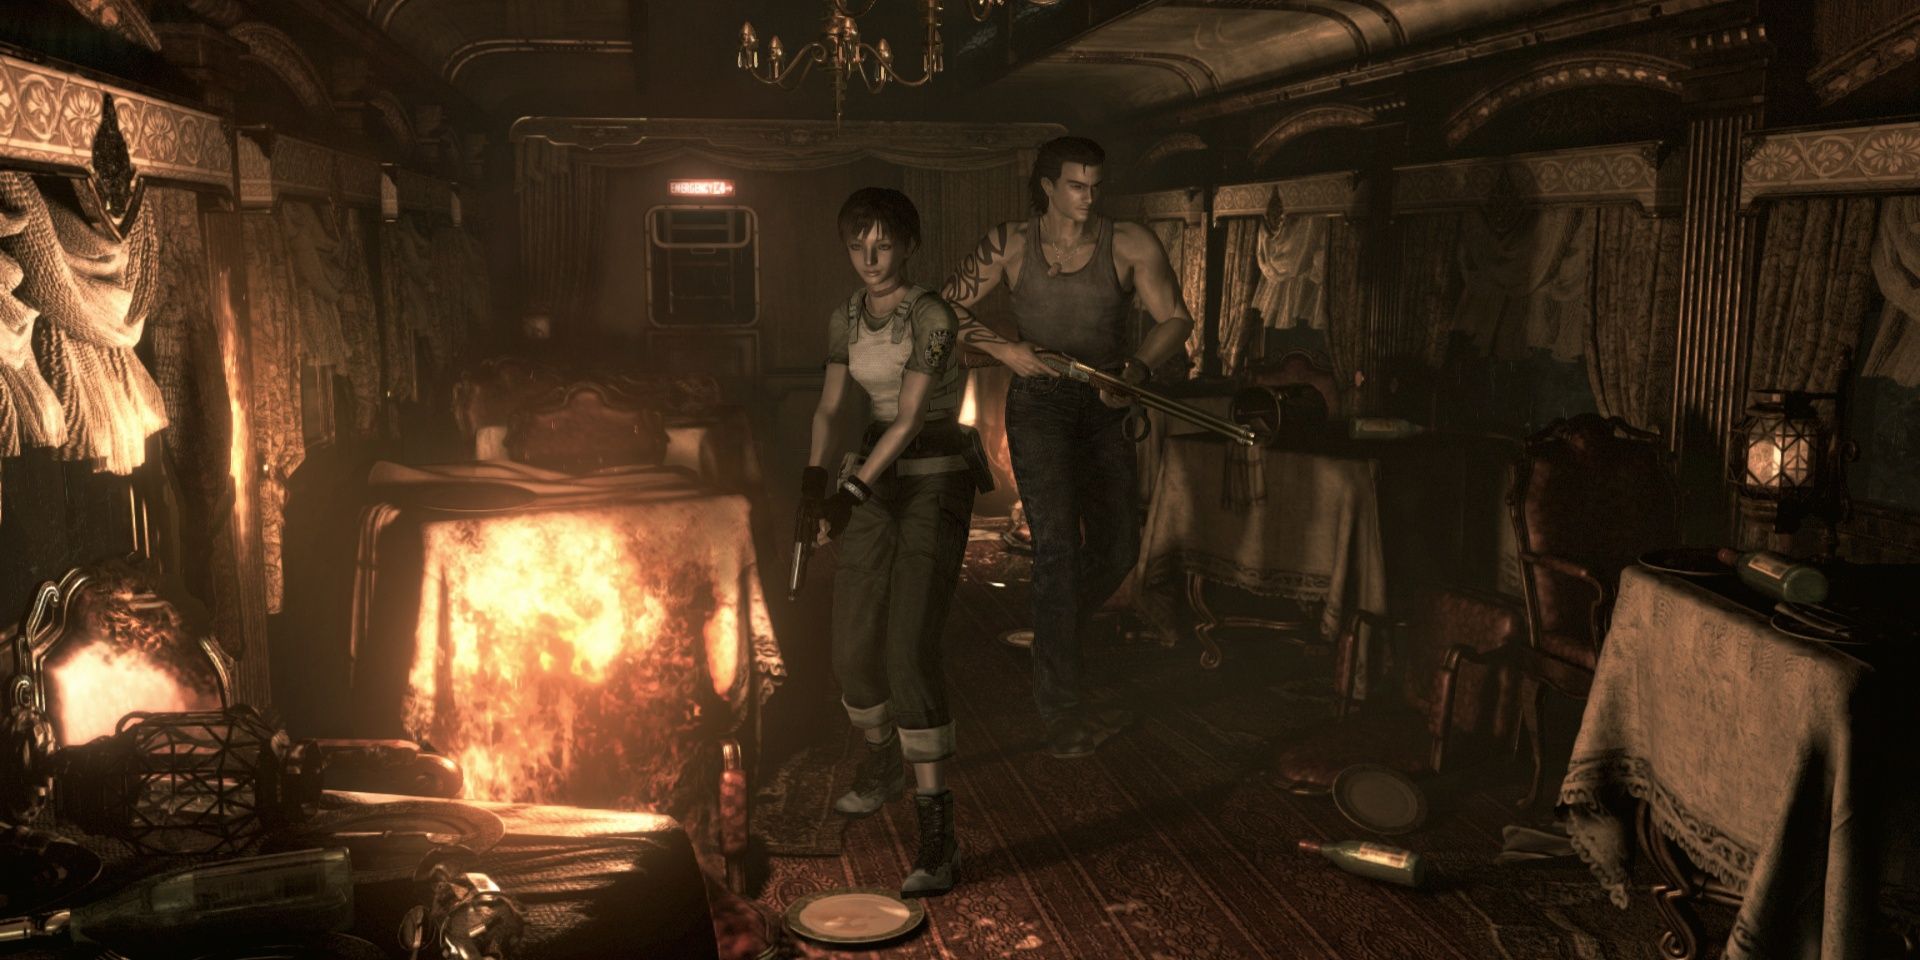 A screenshot showing Rebecca and Billy navigating a spooky and mysterious room filled with antiques in Resident Evil Zero.